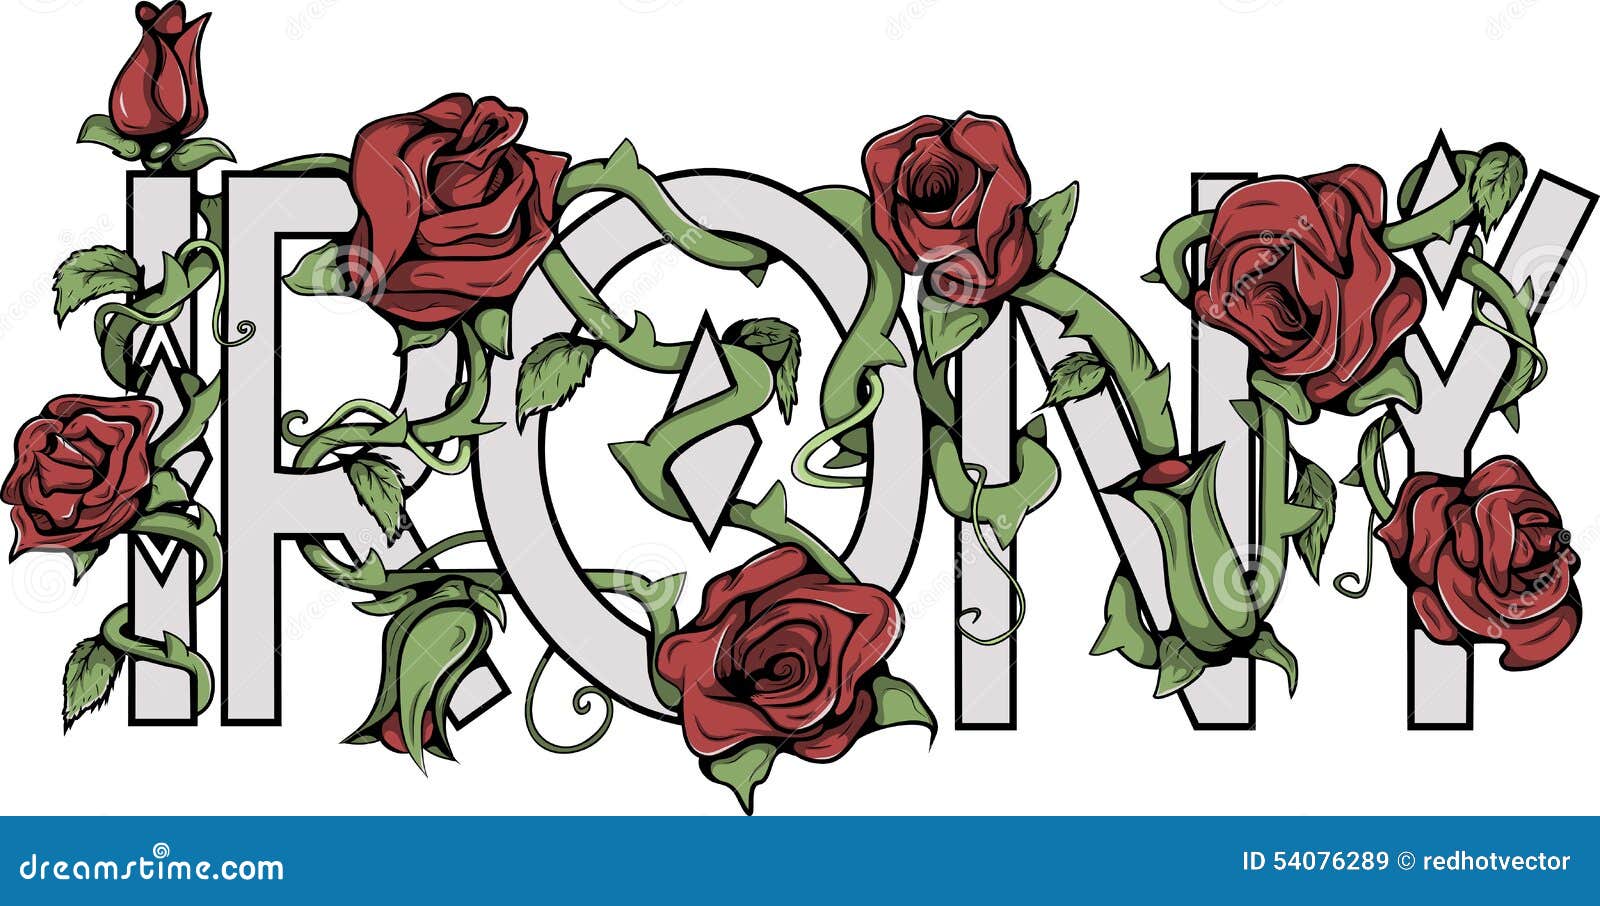 irony sign with roses.